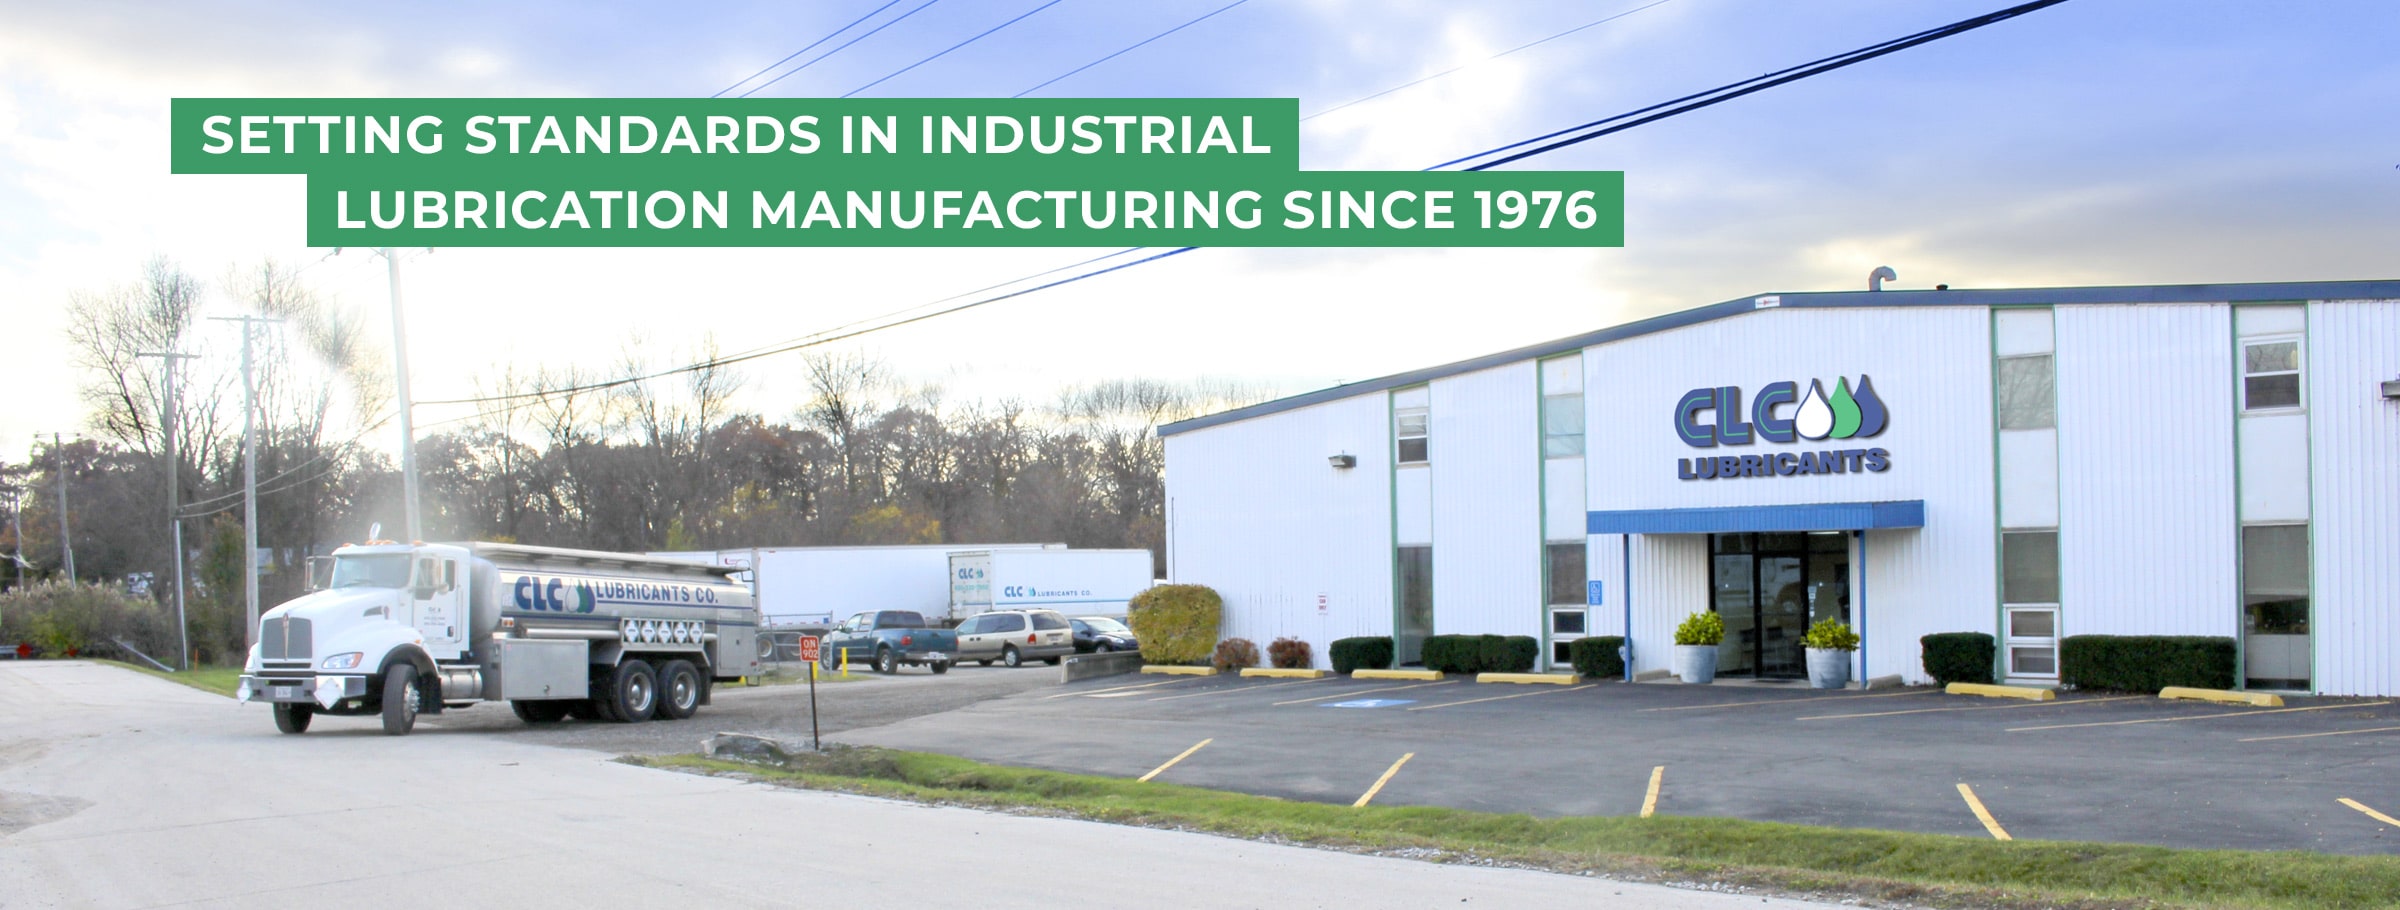 Setting standards in industrial lubrication manufacturing since 1976